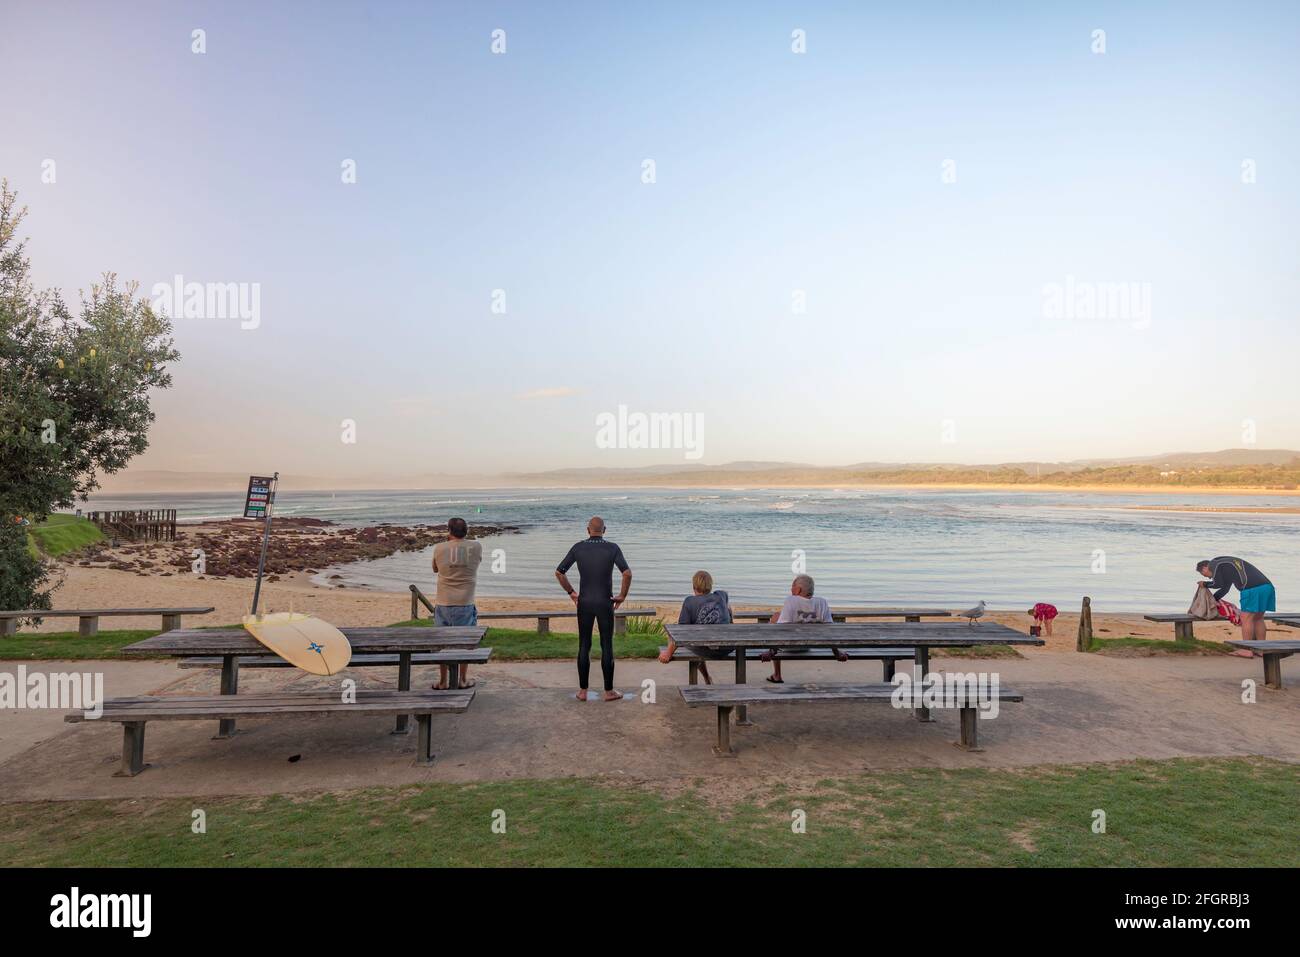 Boardriders young and old watch the surf at Bar Beach in Merimbula on the New South Wales south coast of Australia in the early morning Stock Photo